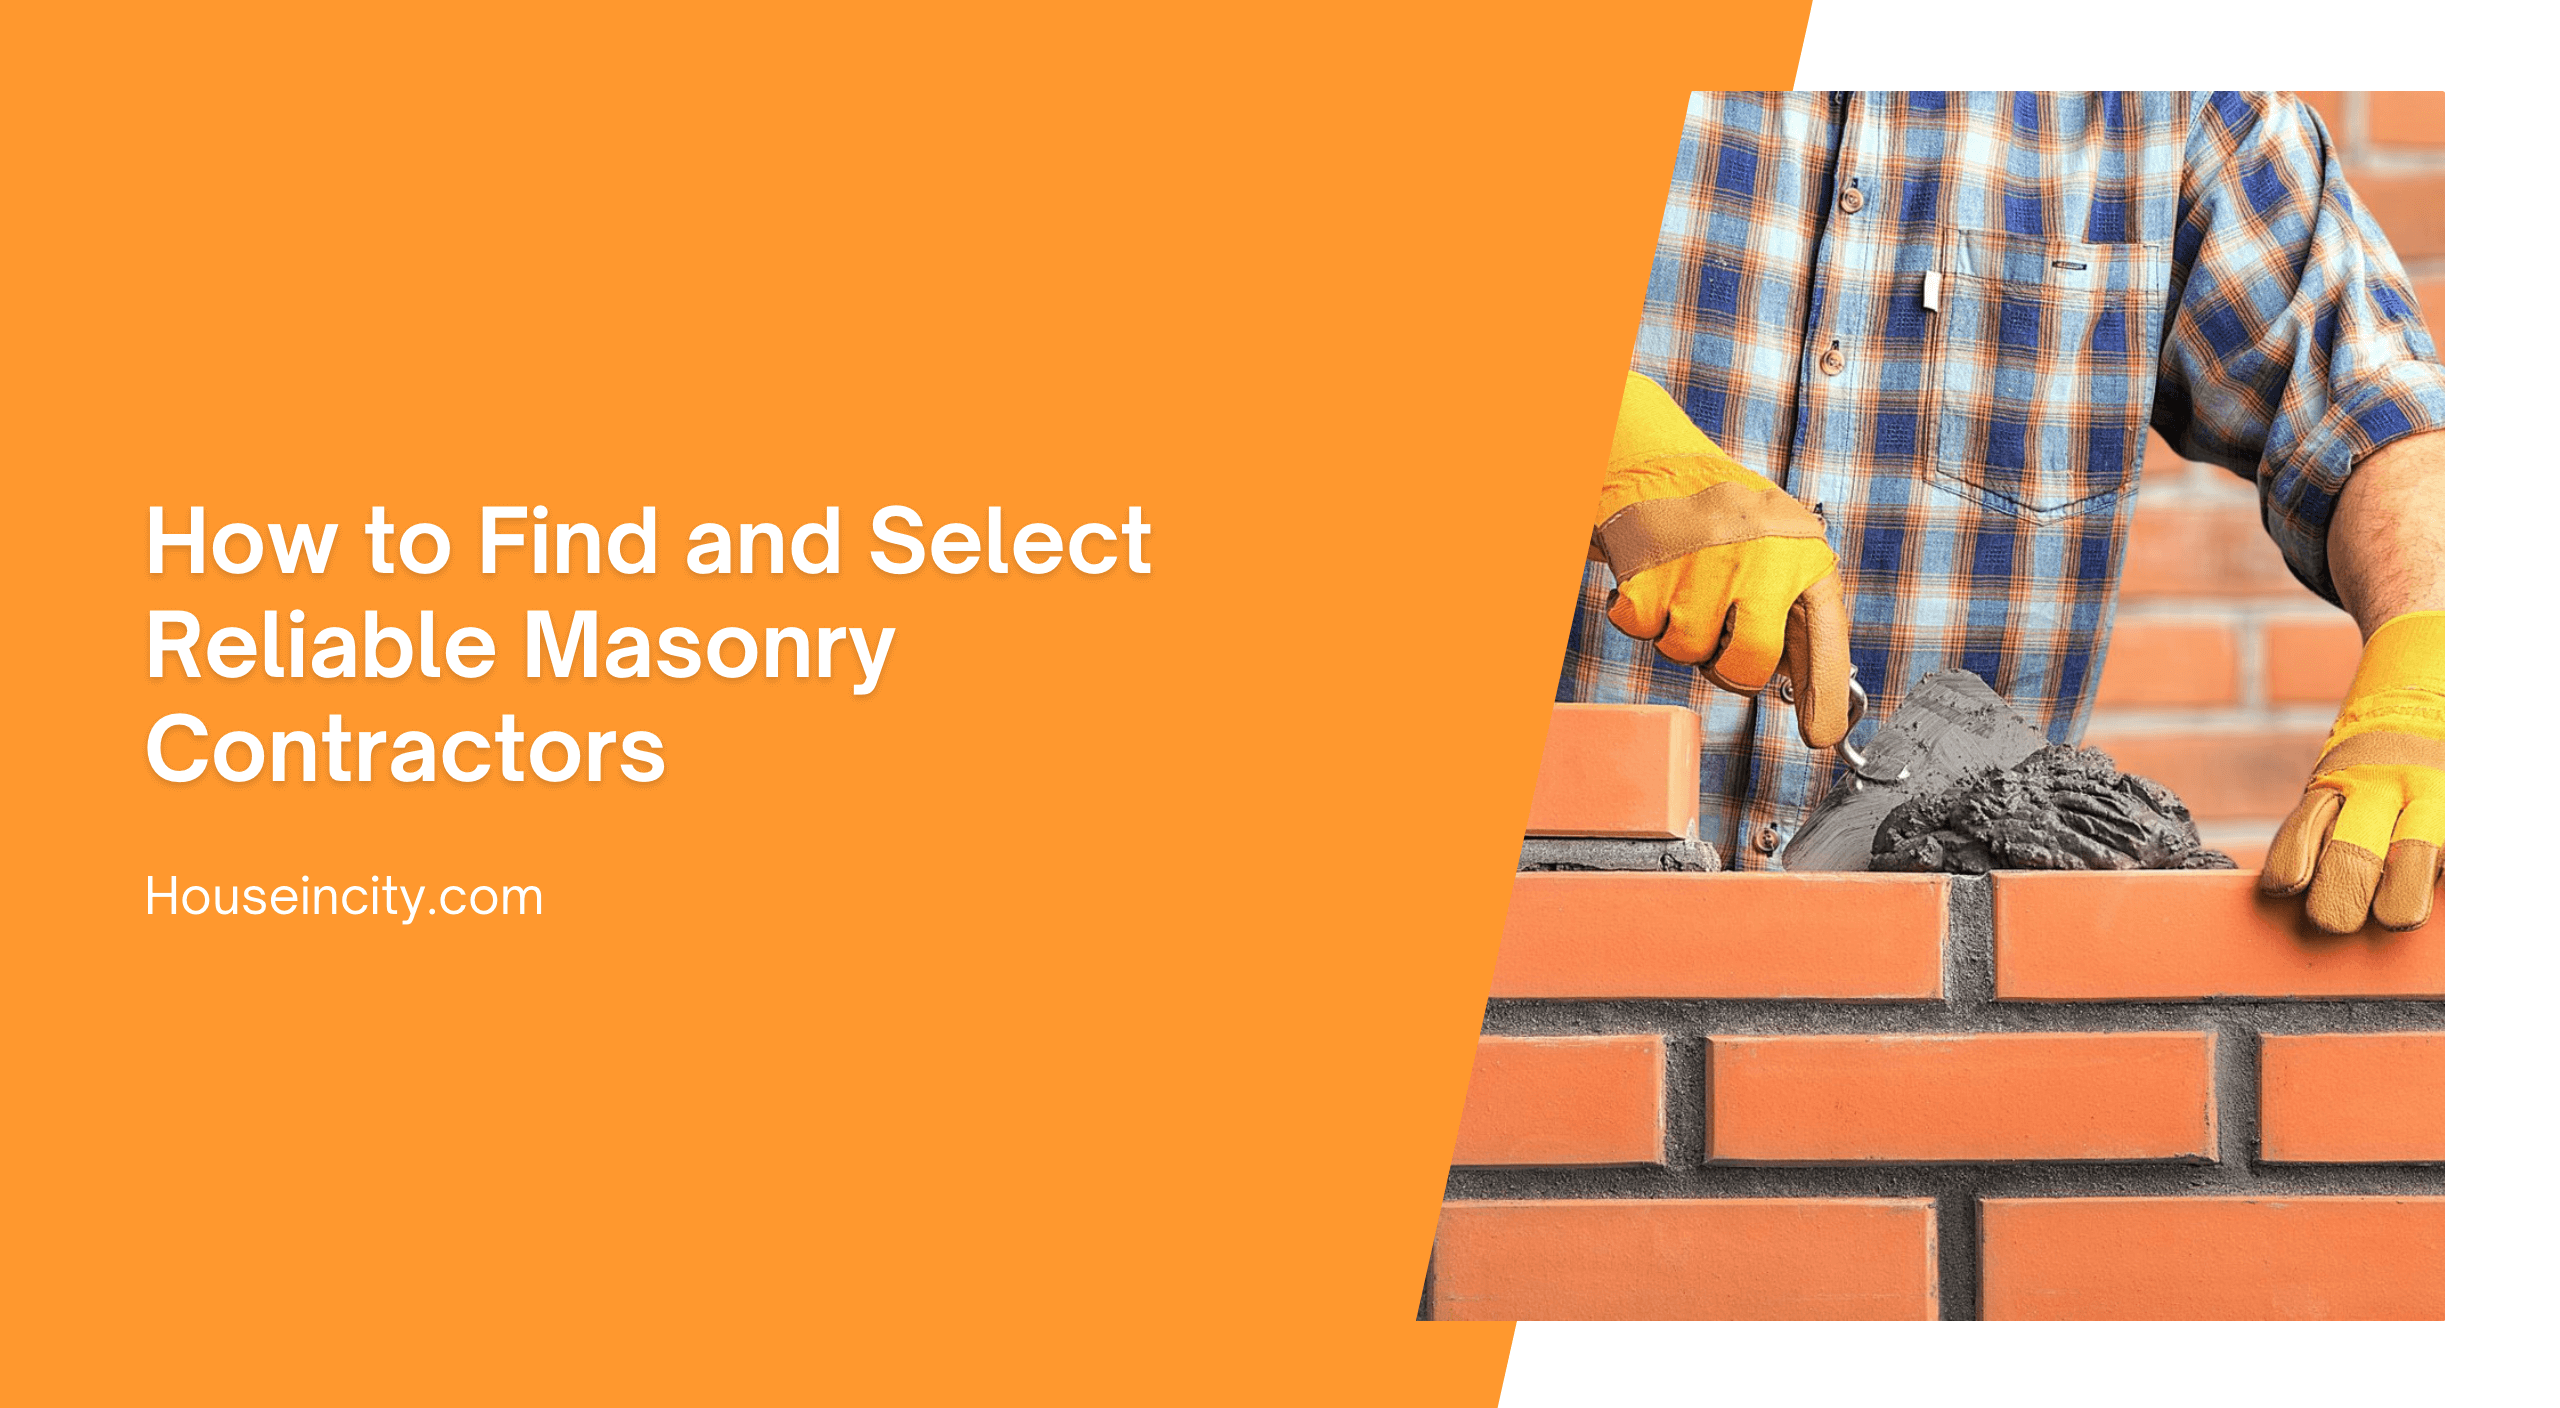 How to Find and Select Reliable Masonry Contractors